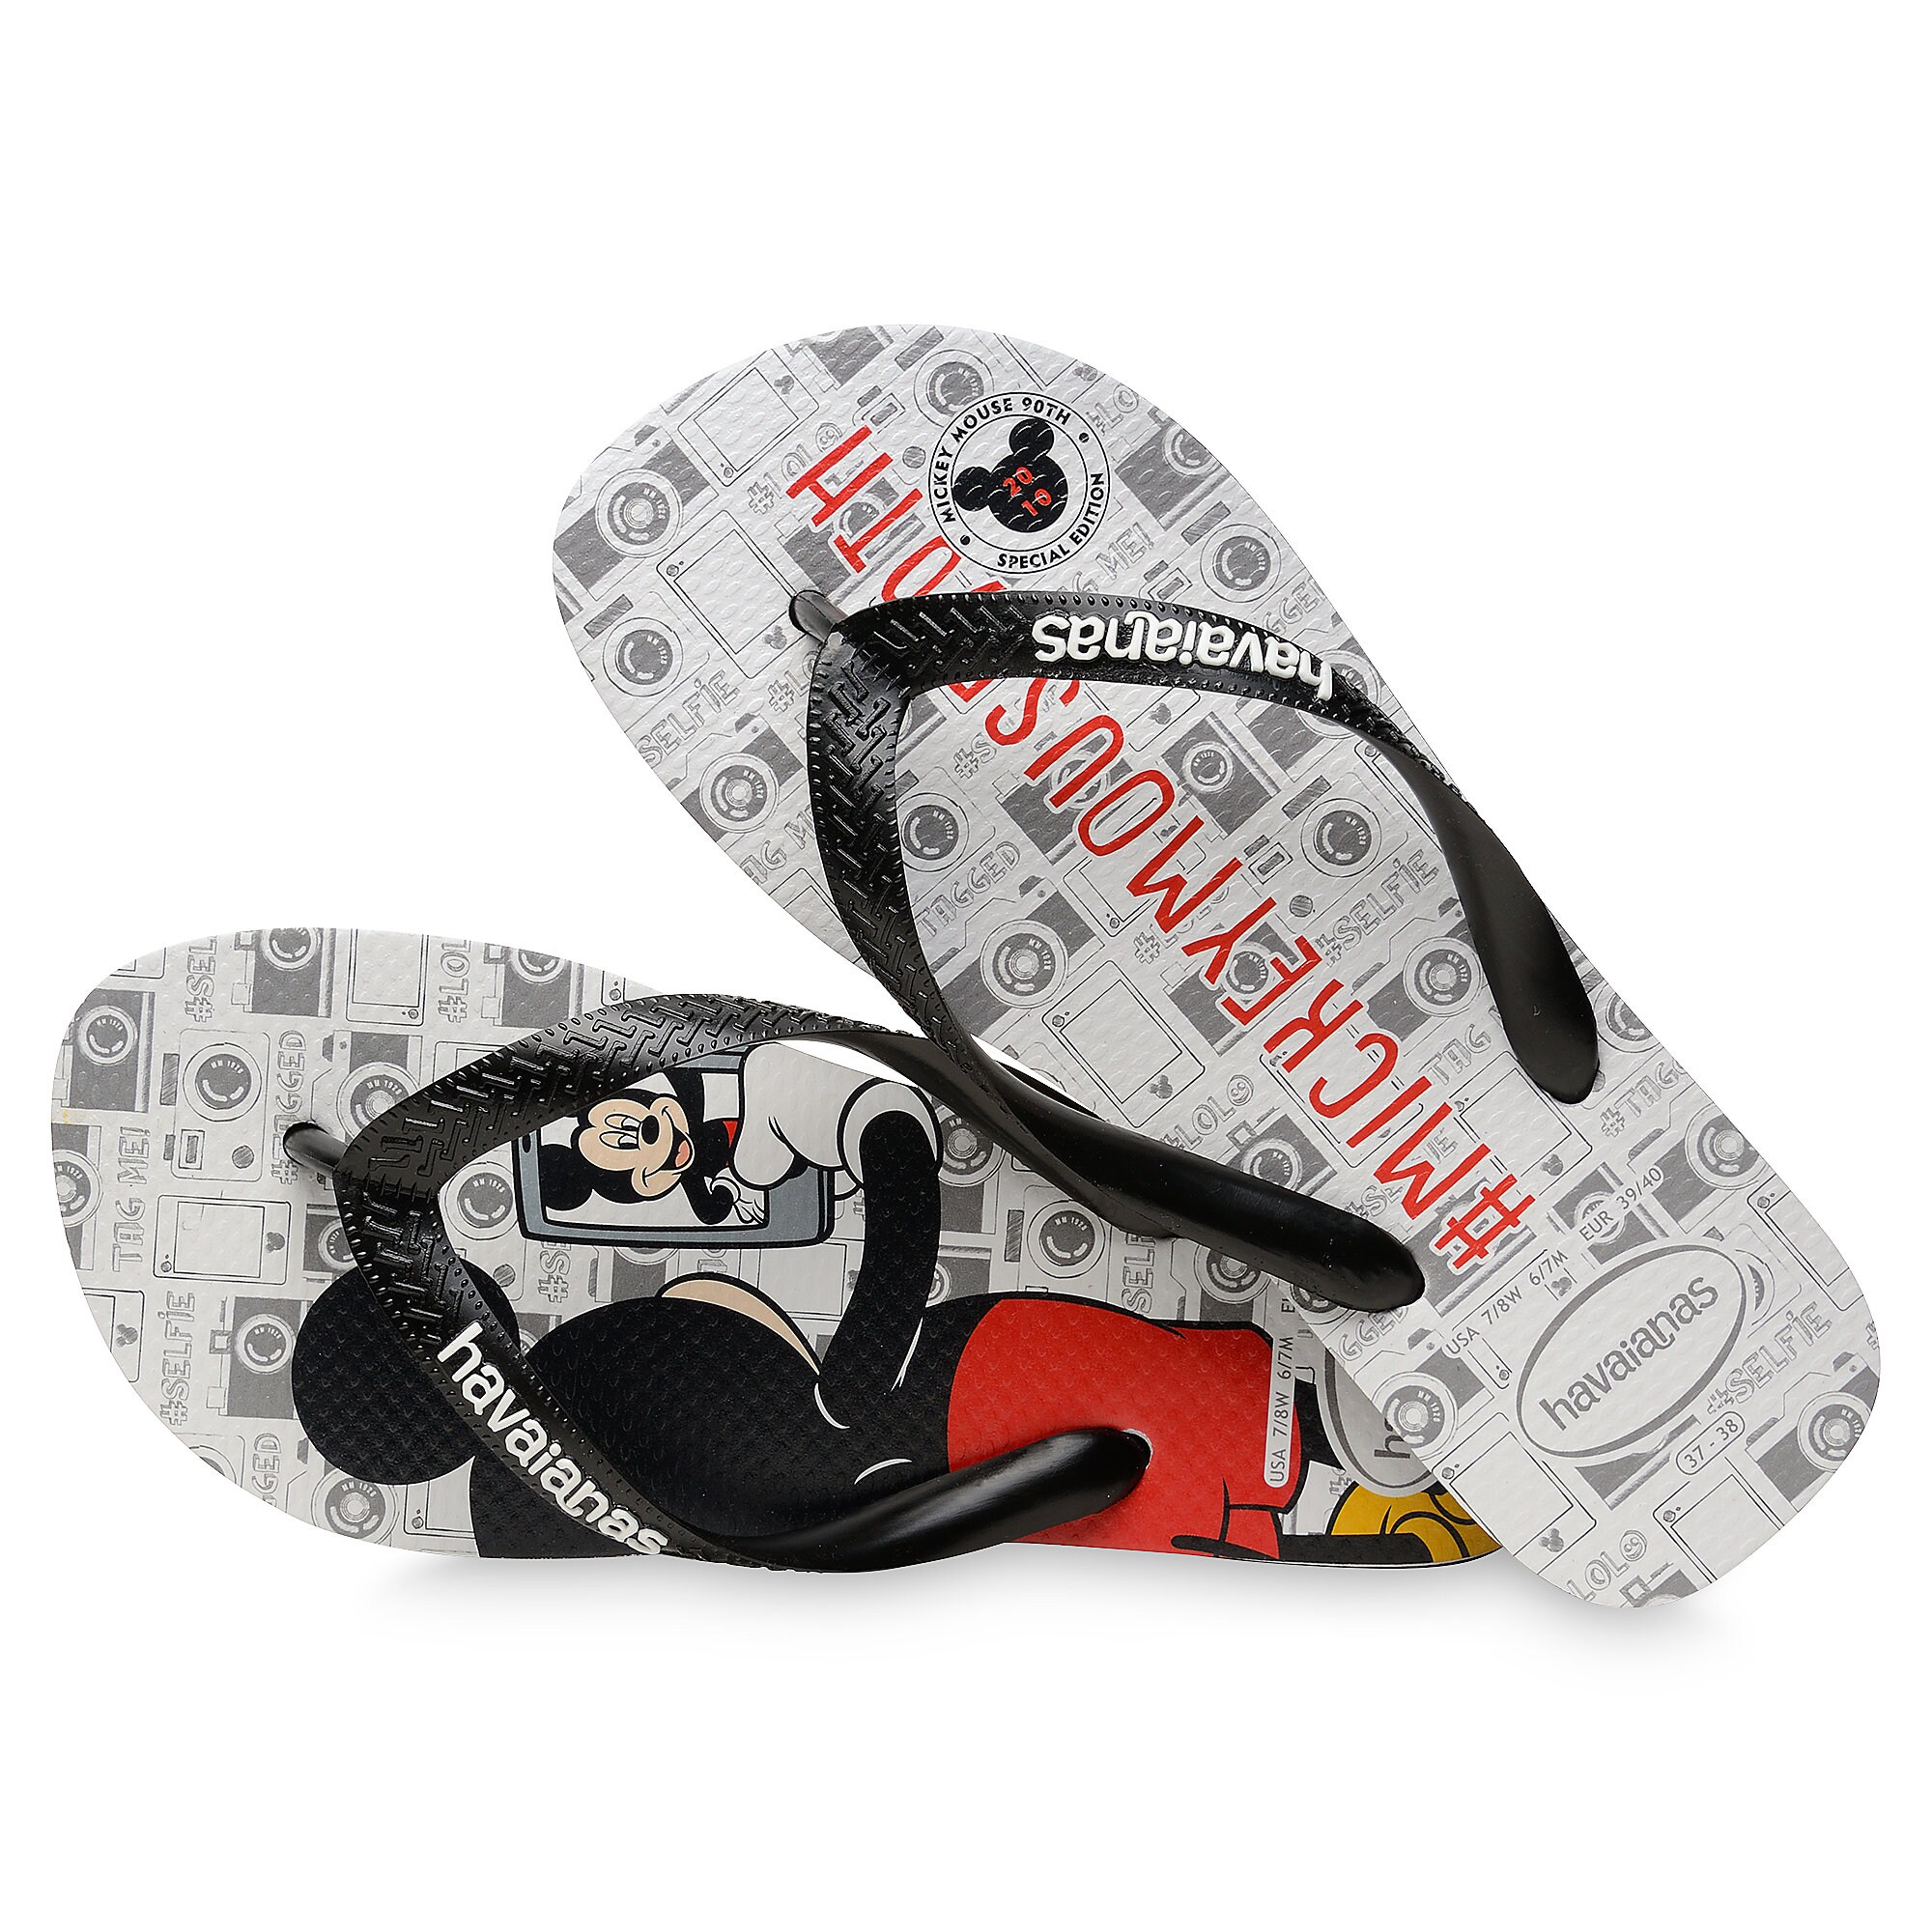 Mickey Mouse Selfie Flip Flops for Adults by Havaianas - 2010s